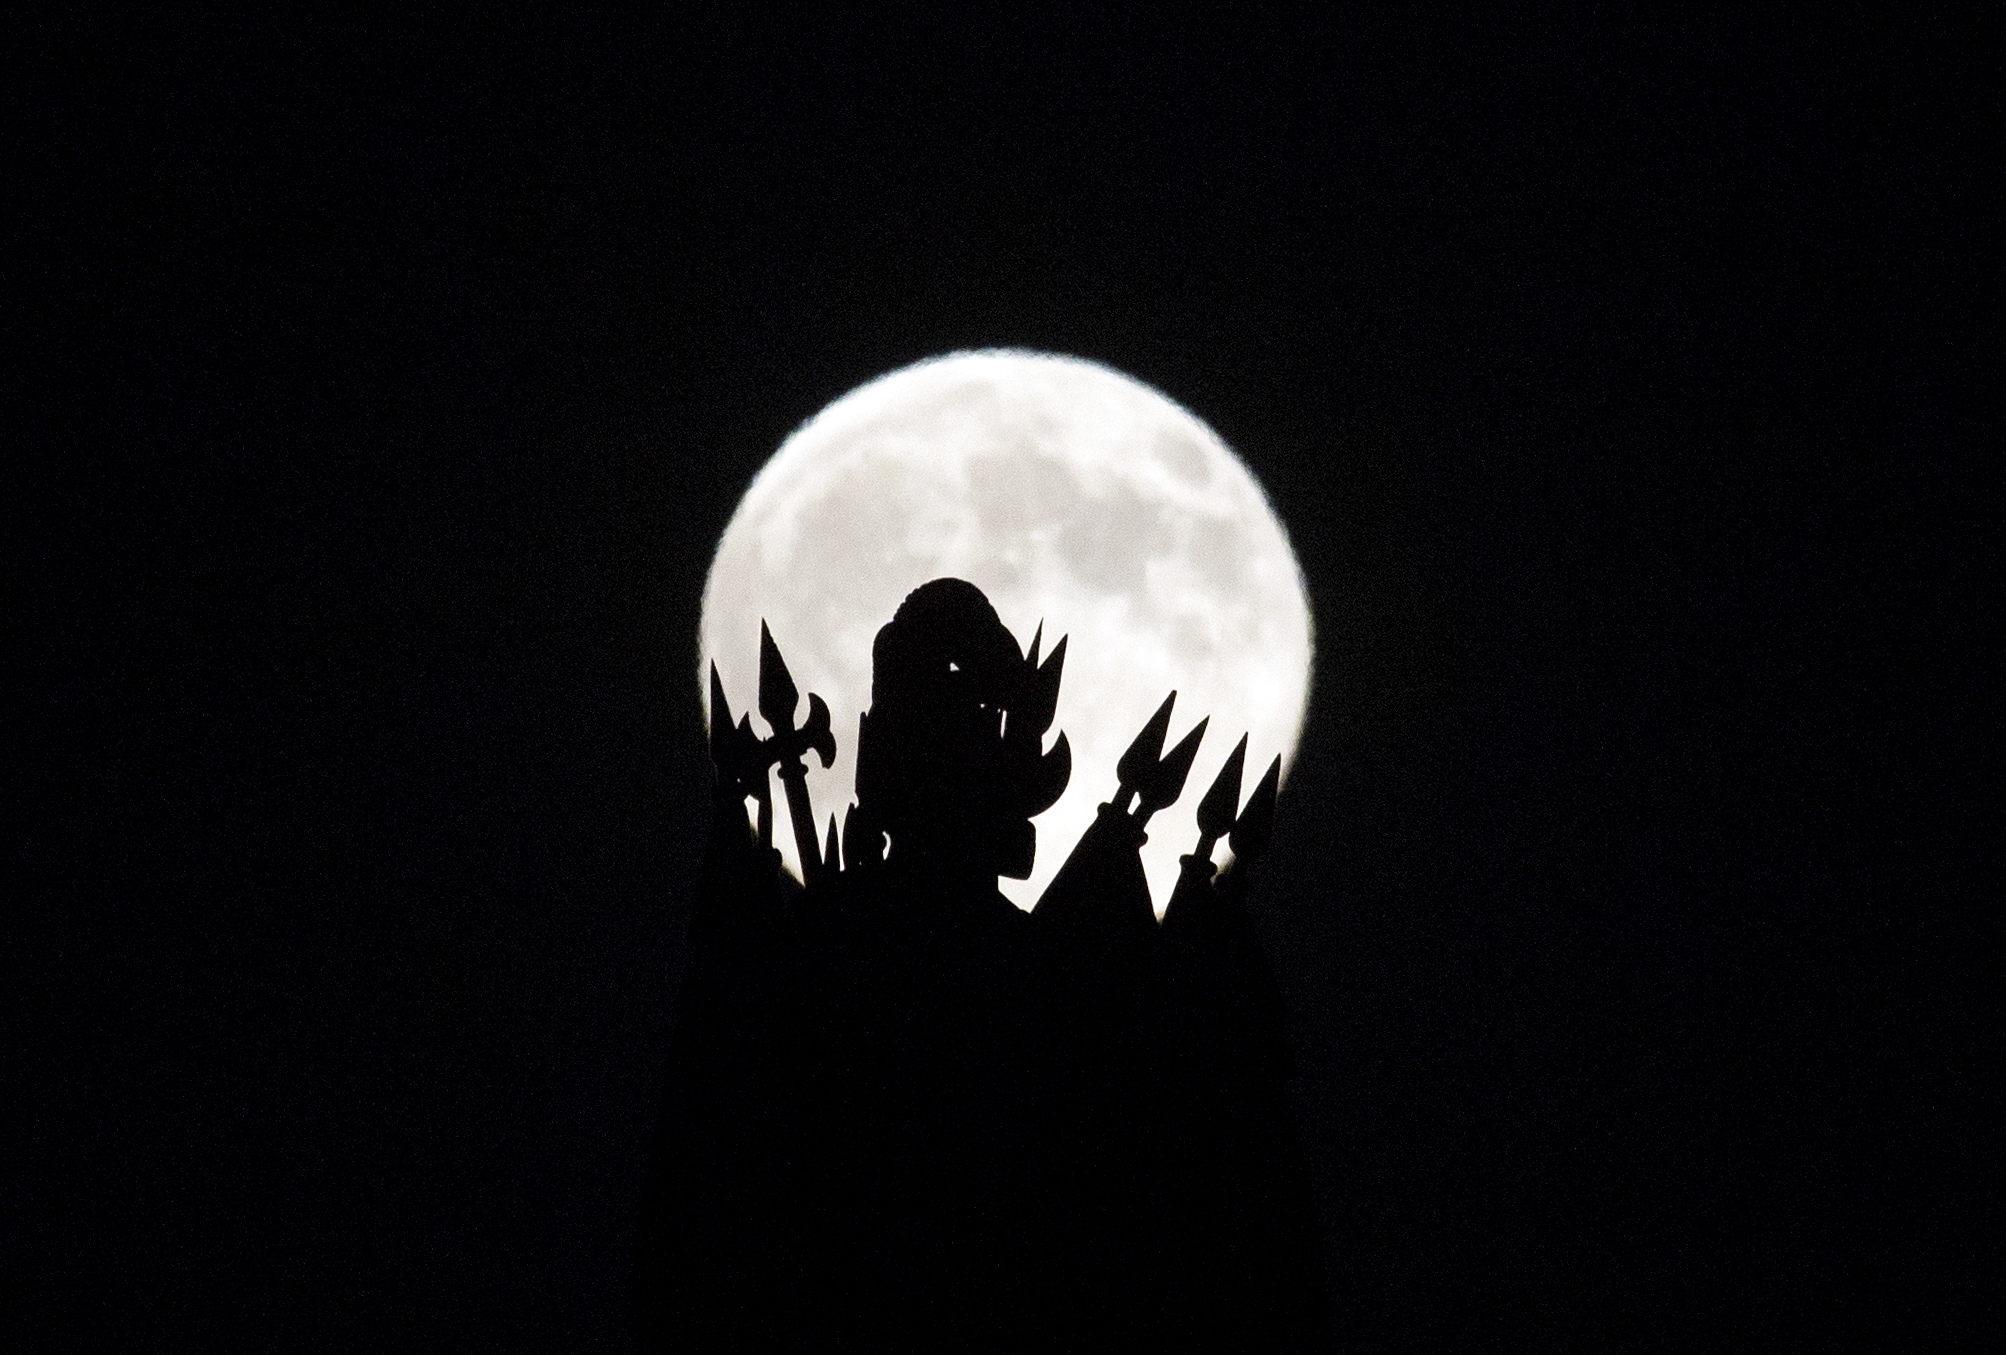 A statue on the roof of the Portuguese finance ministry in Lisbon is silhouetted against a so-called "supermoon"